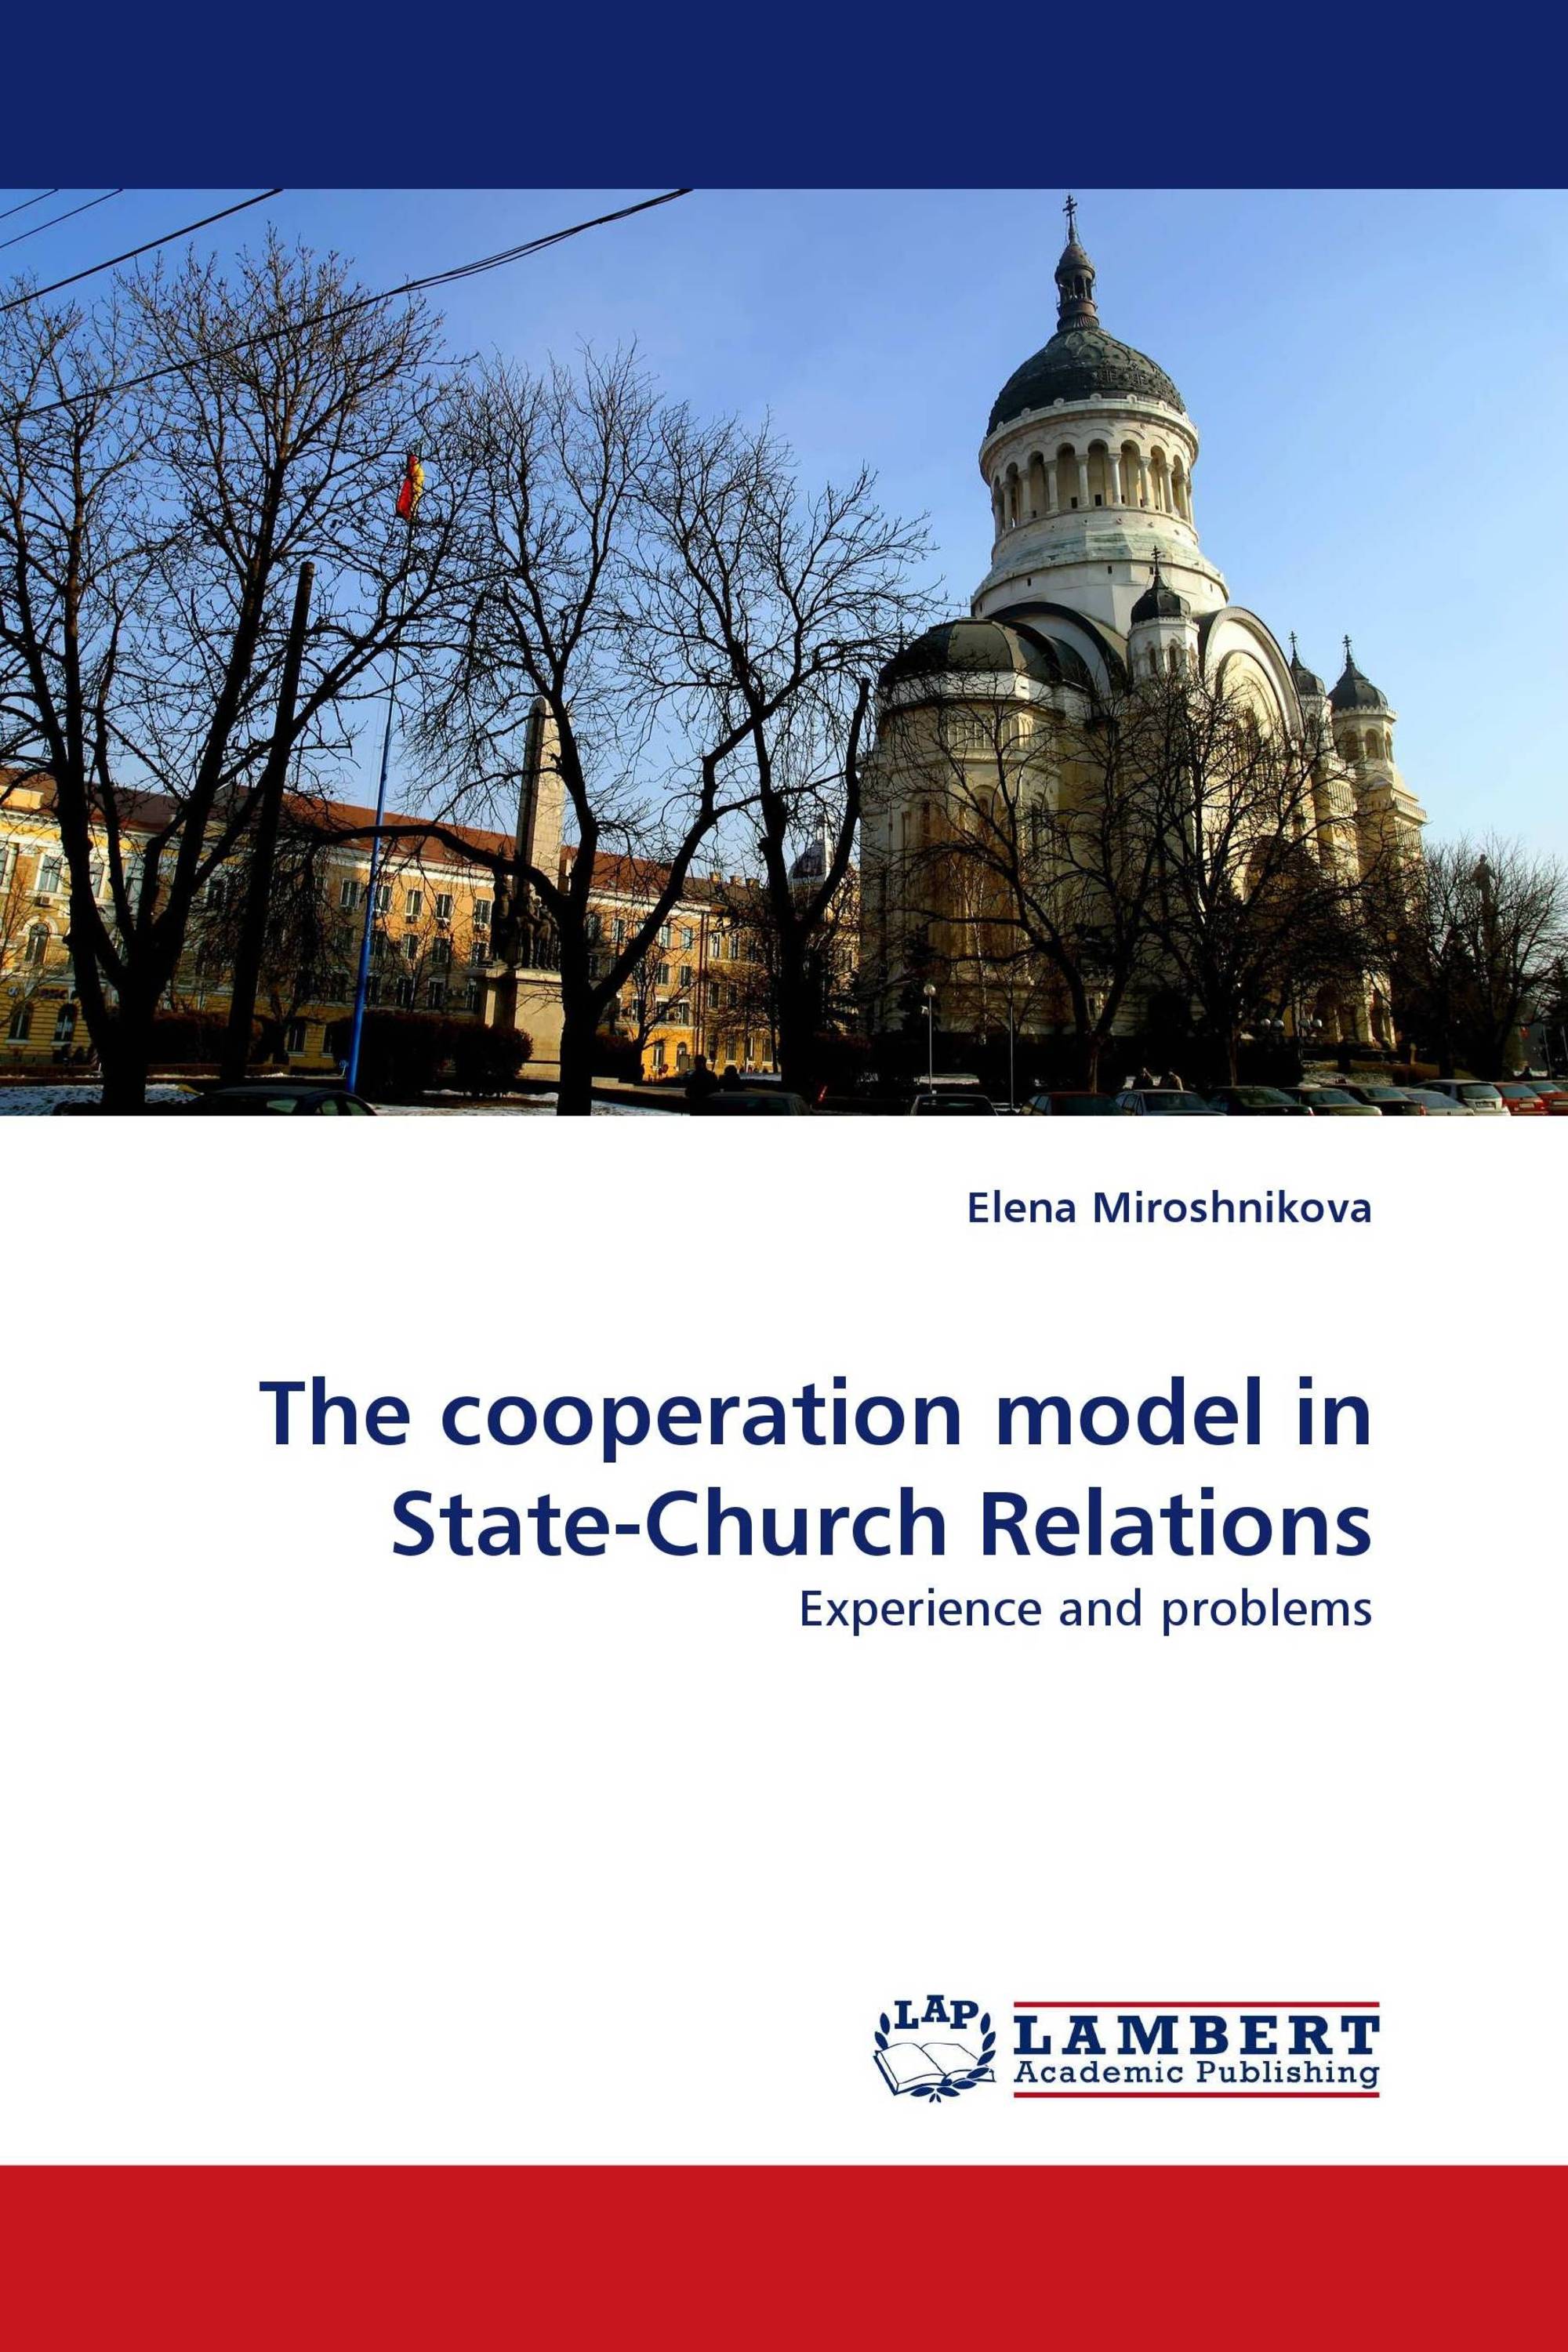 The cooperation model in State-Church Relations